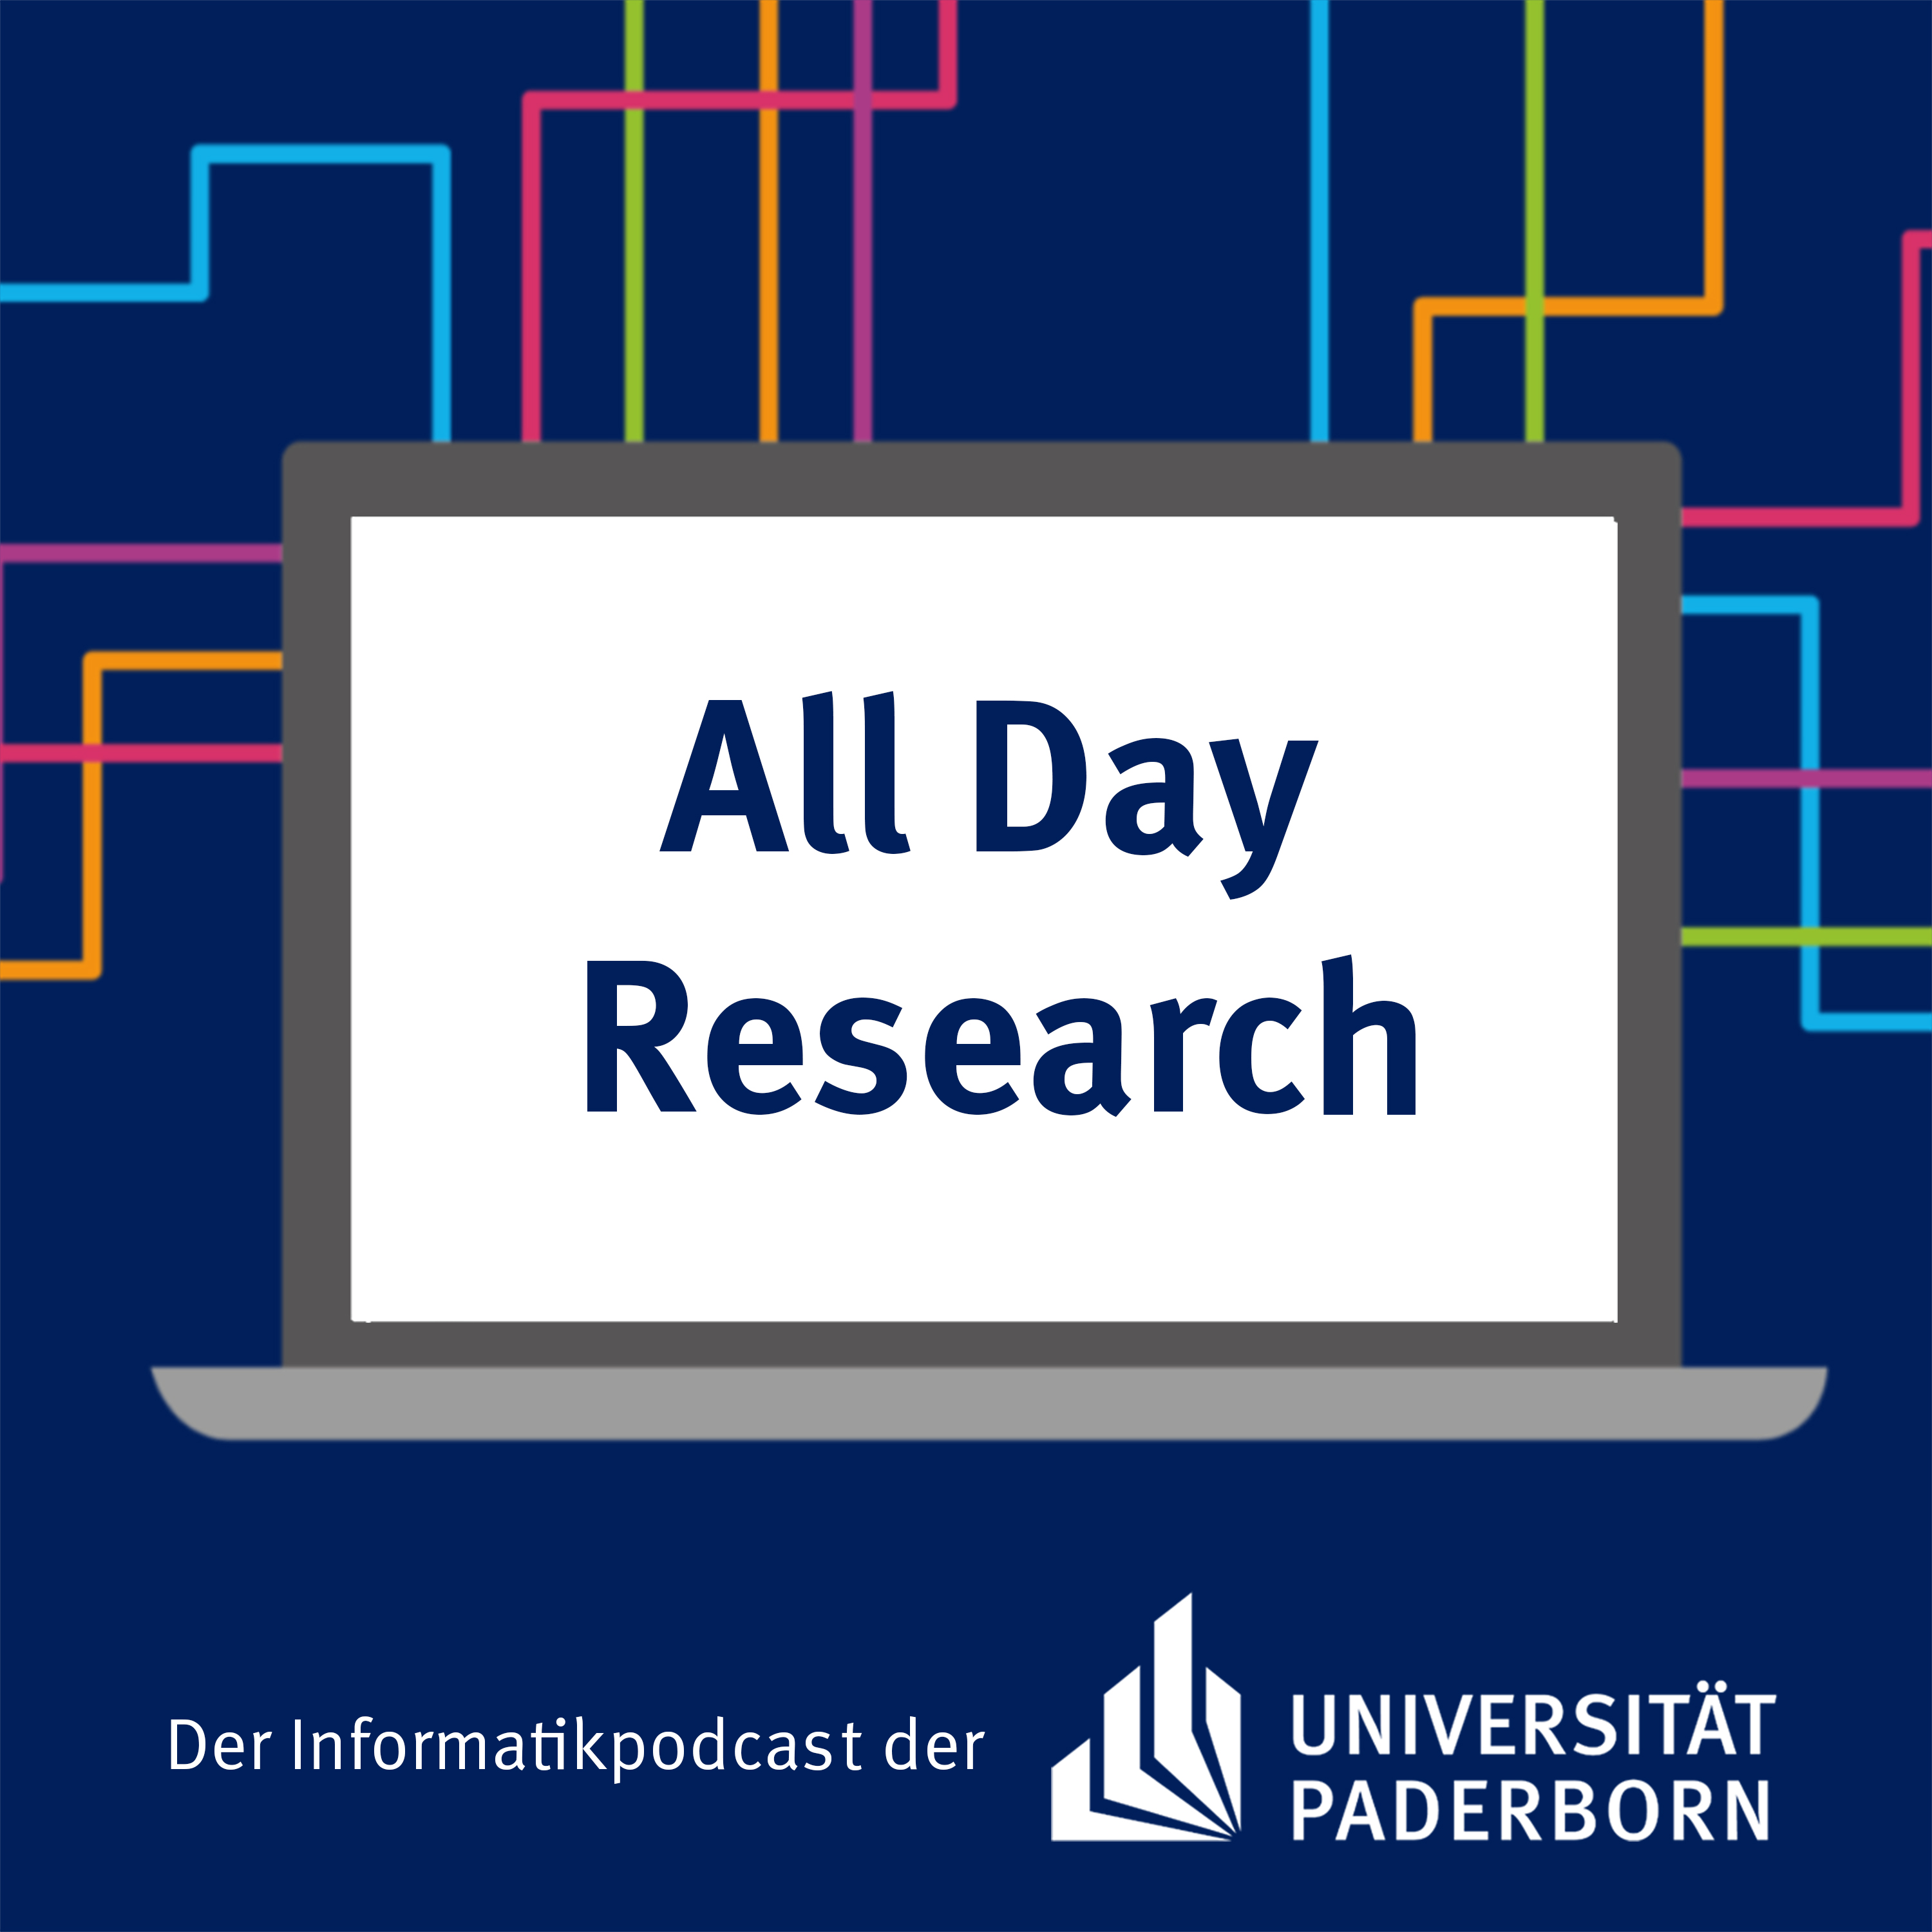 All Day Research - Der Informatikpodcast artwork